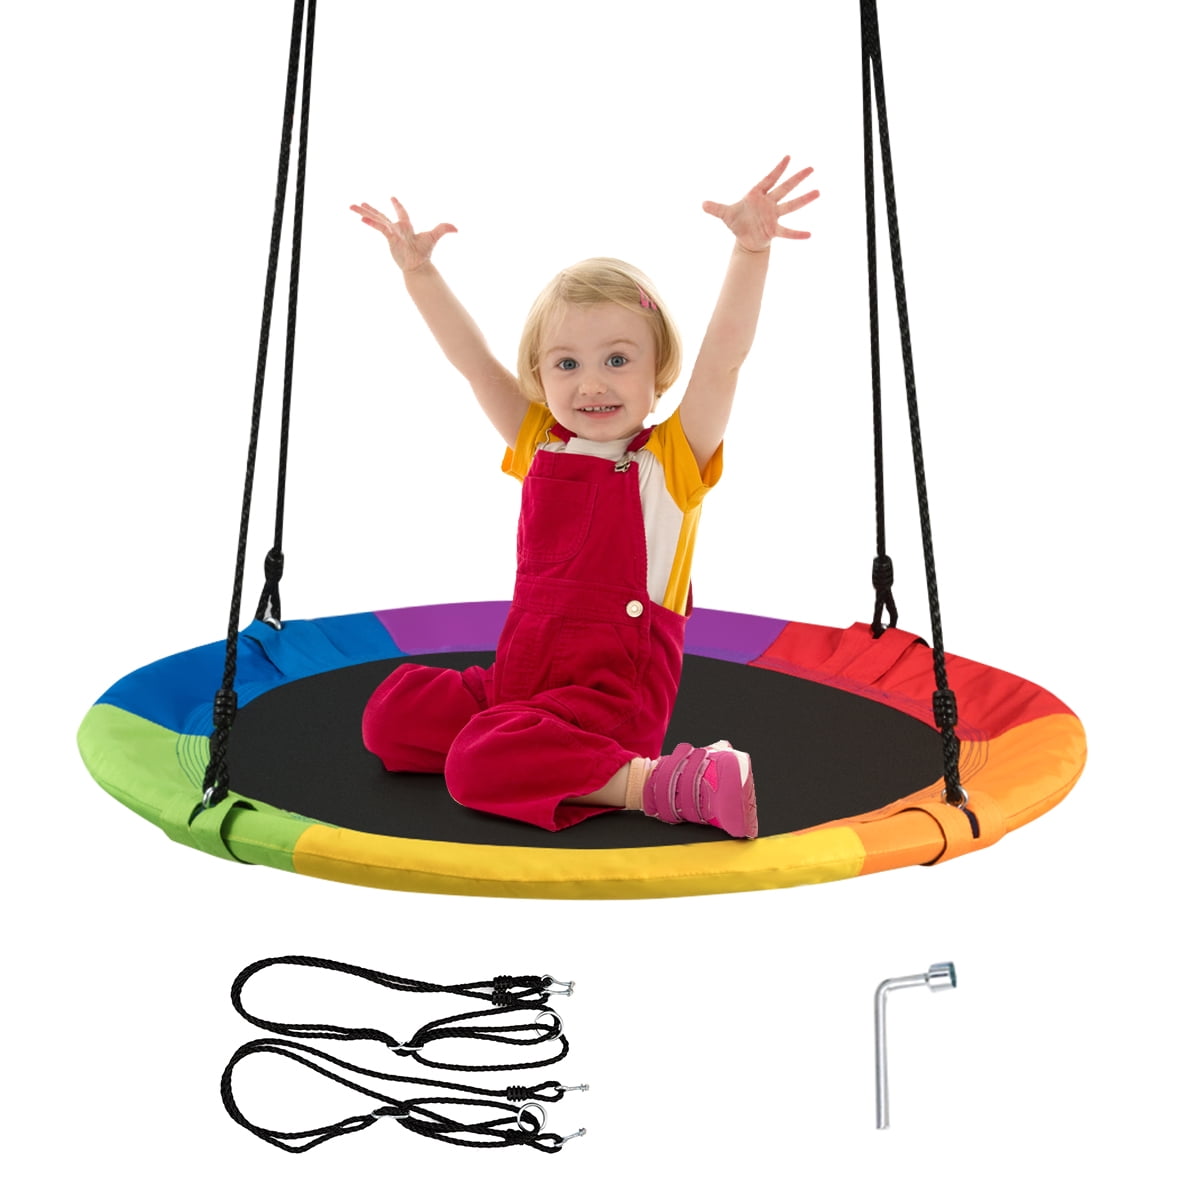 Details about   40 Kids Play Multi-Color Flying Saucer Tree Swing Set With Adjustable Heights 